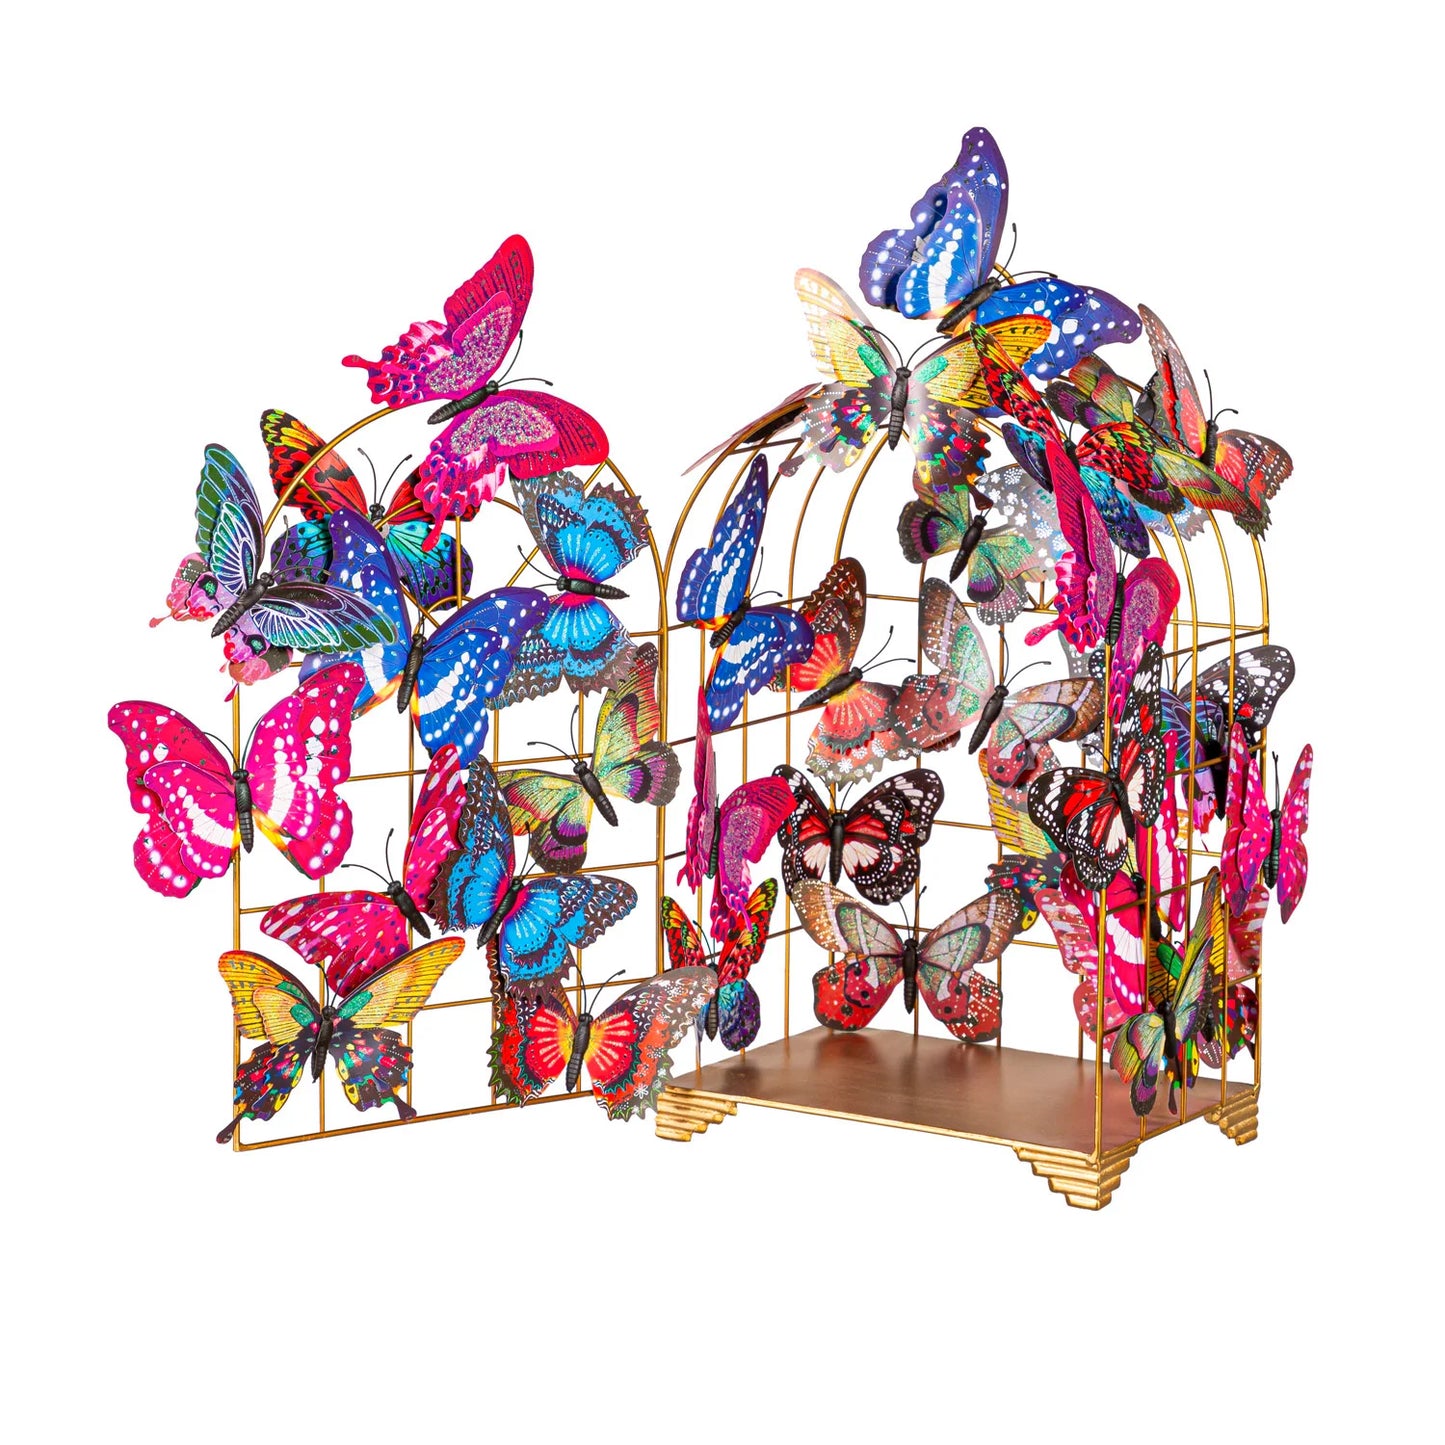 Outdoor Magnetic Glitter Butterfly